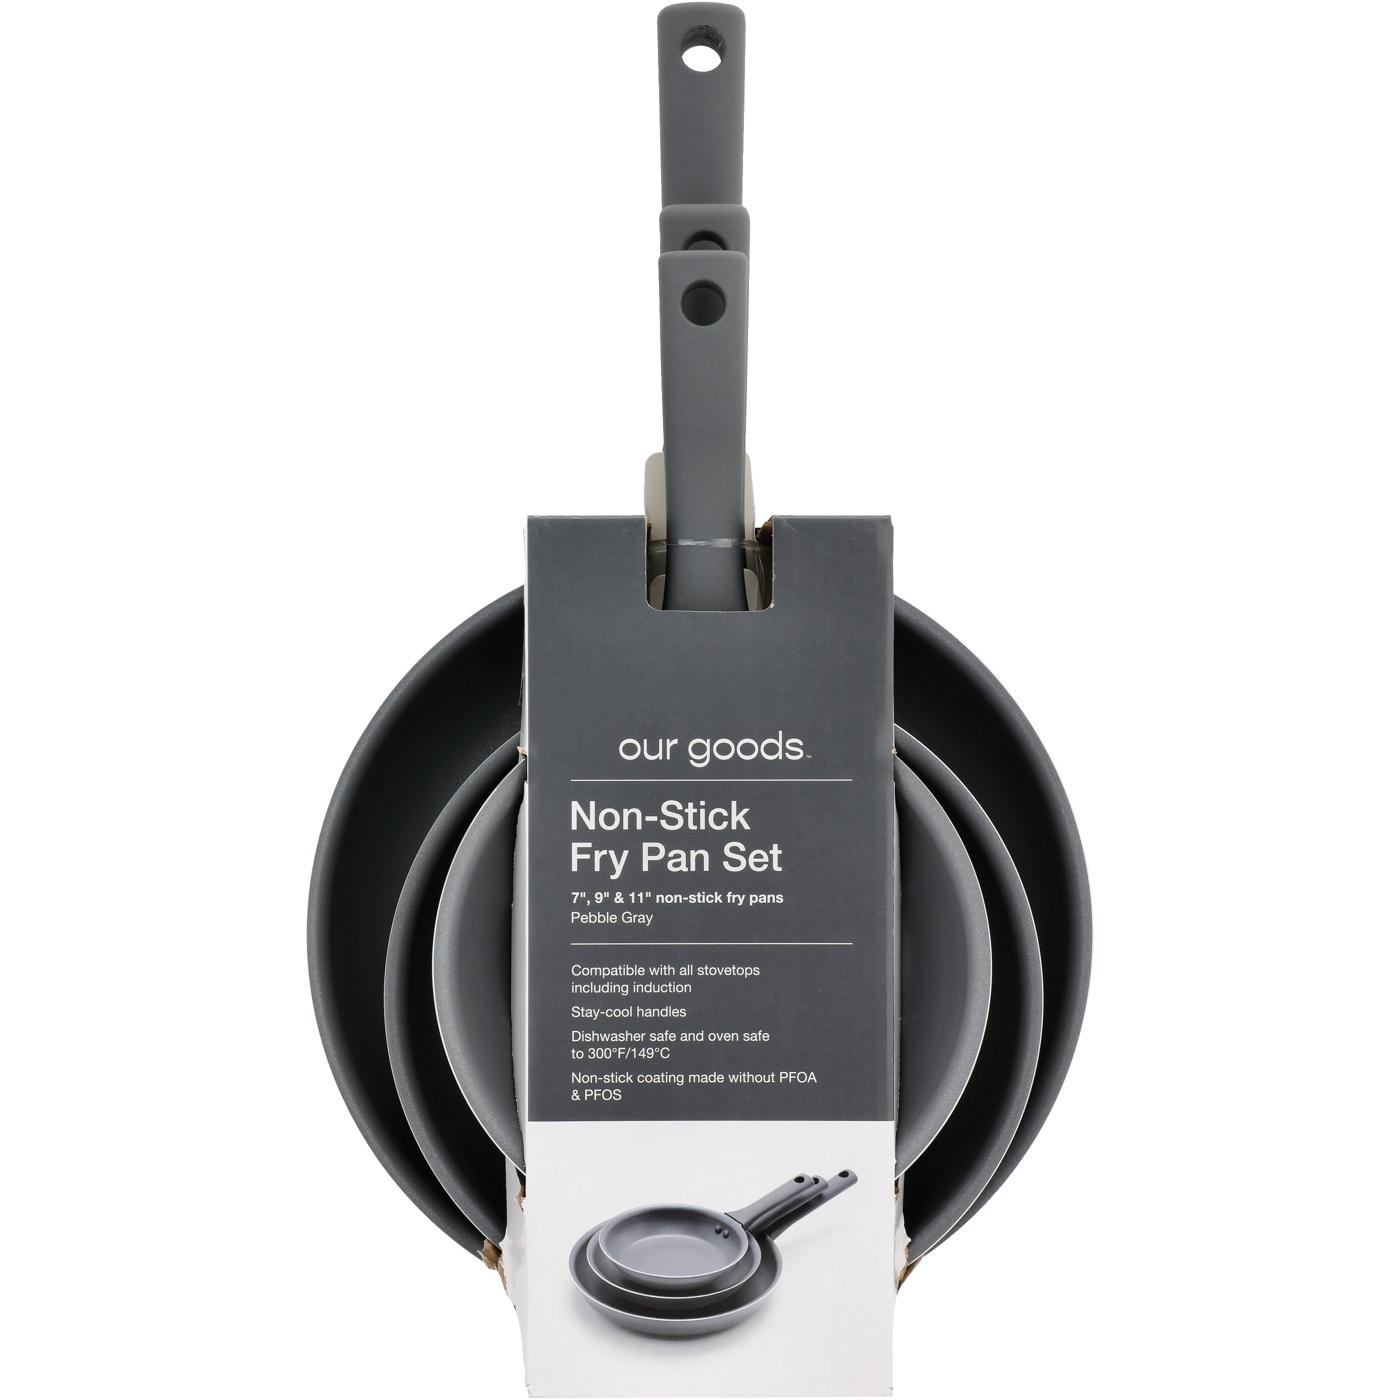 our goods Non-Stick Fry Pan Set - Pebble Gray; image 2 of 2